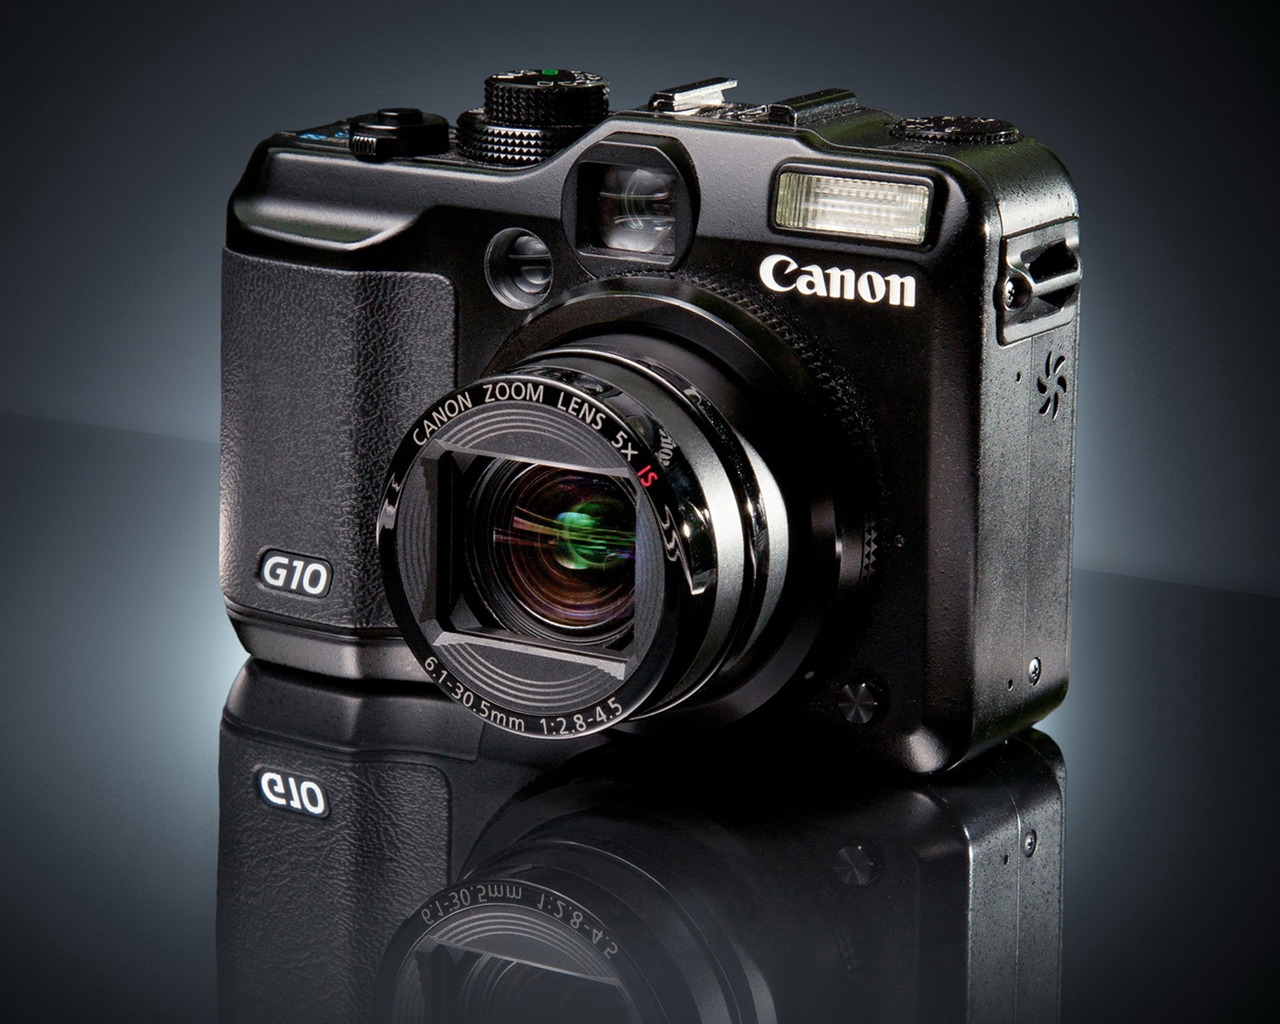 Canon G10 for 1280 x 1024 resolution